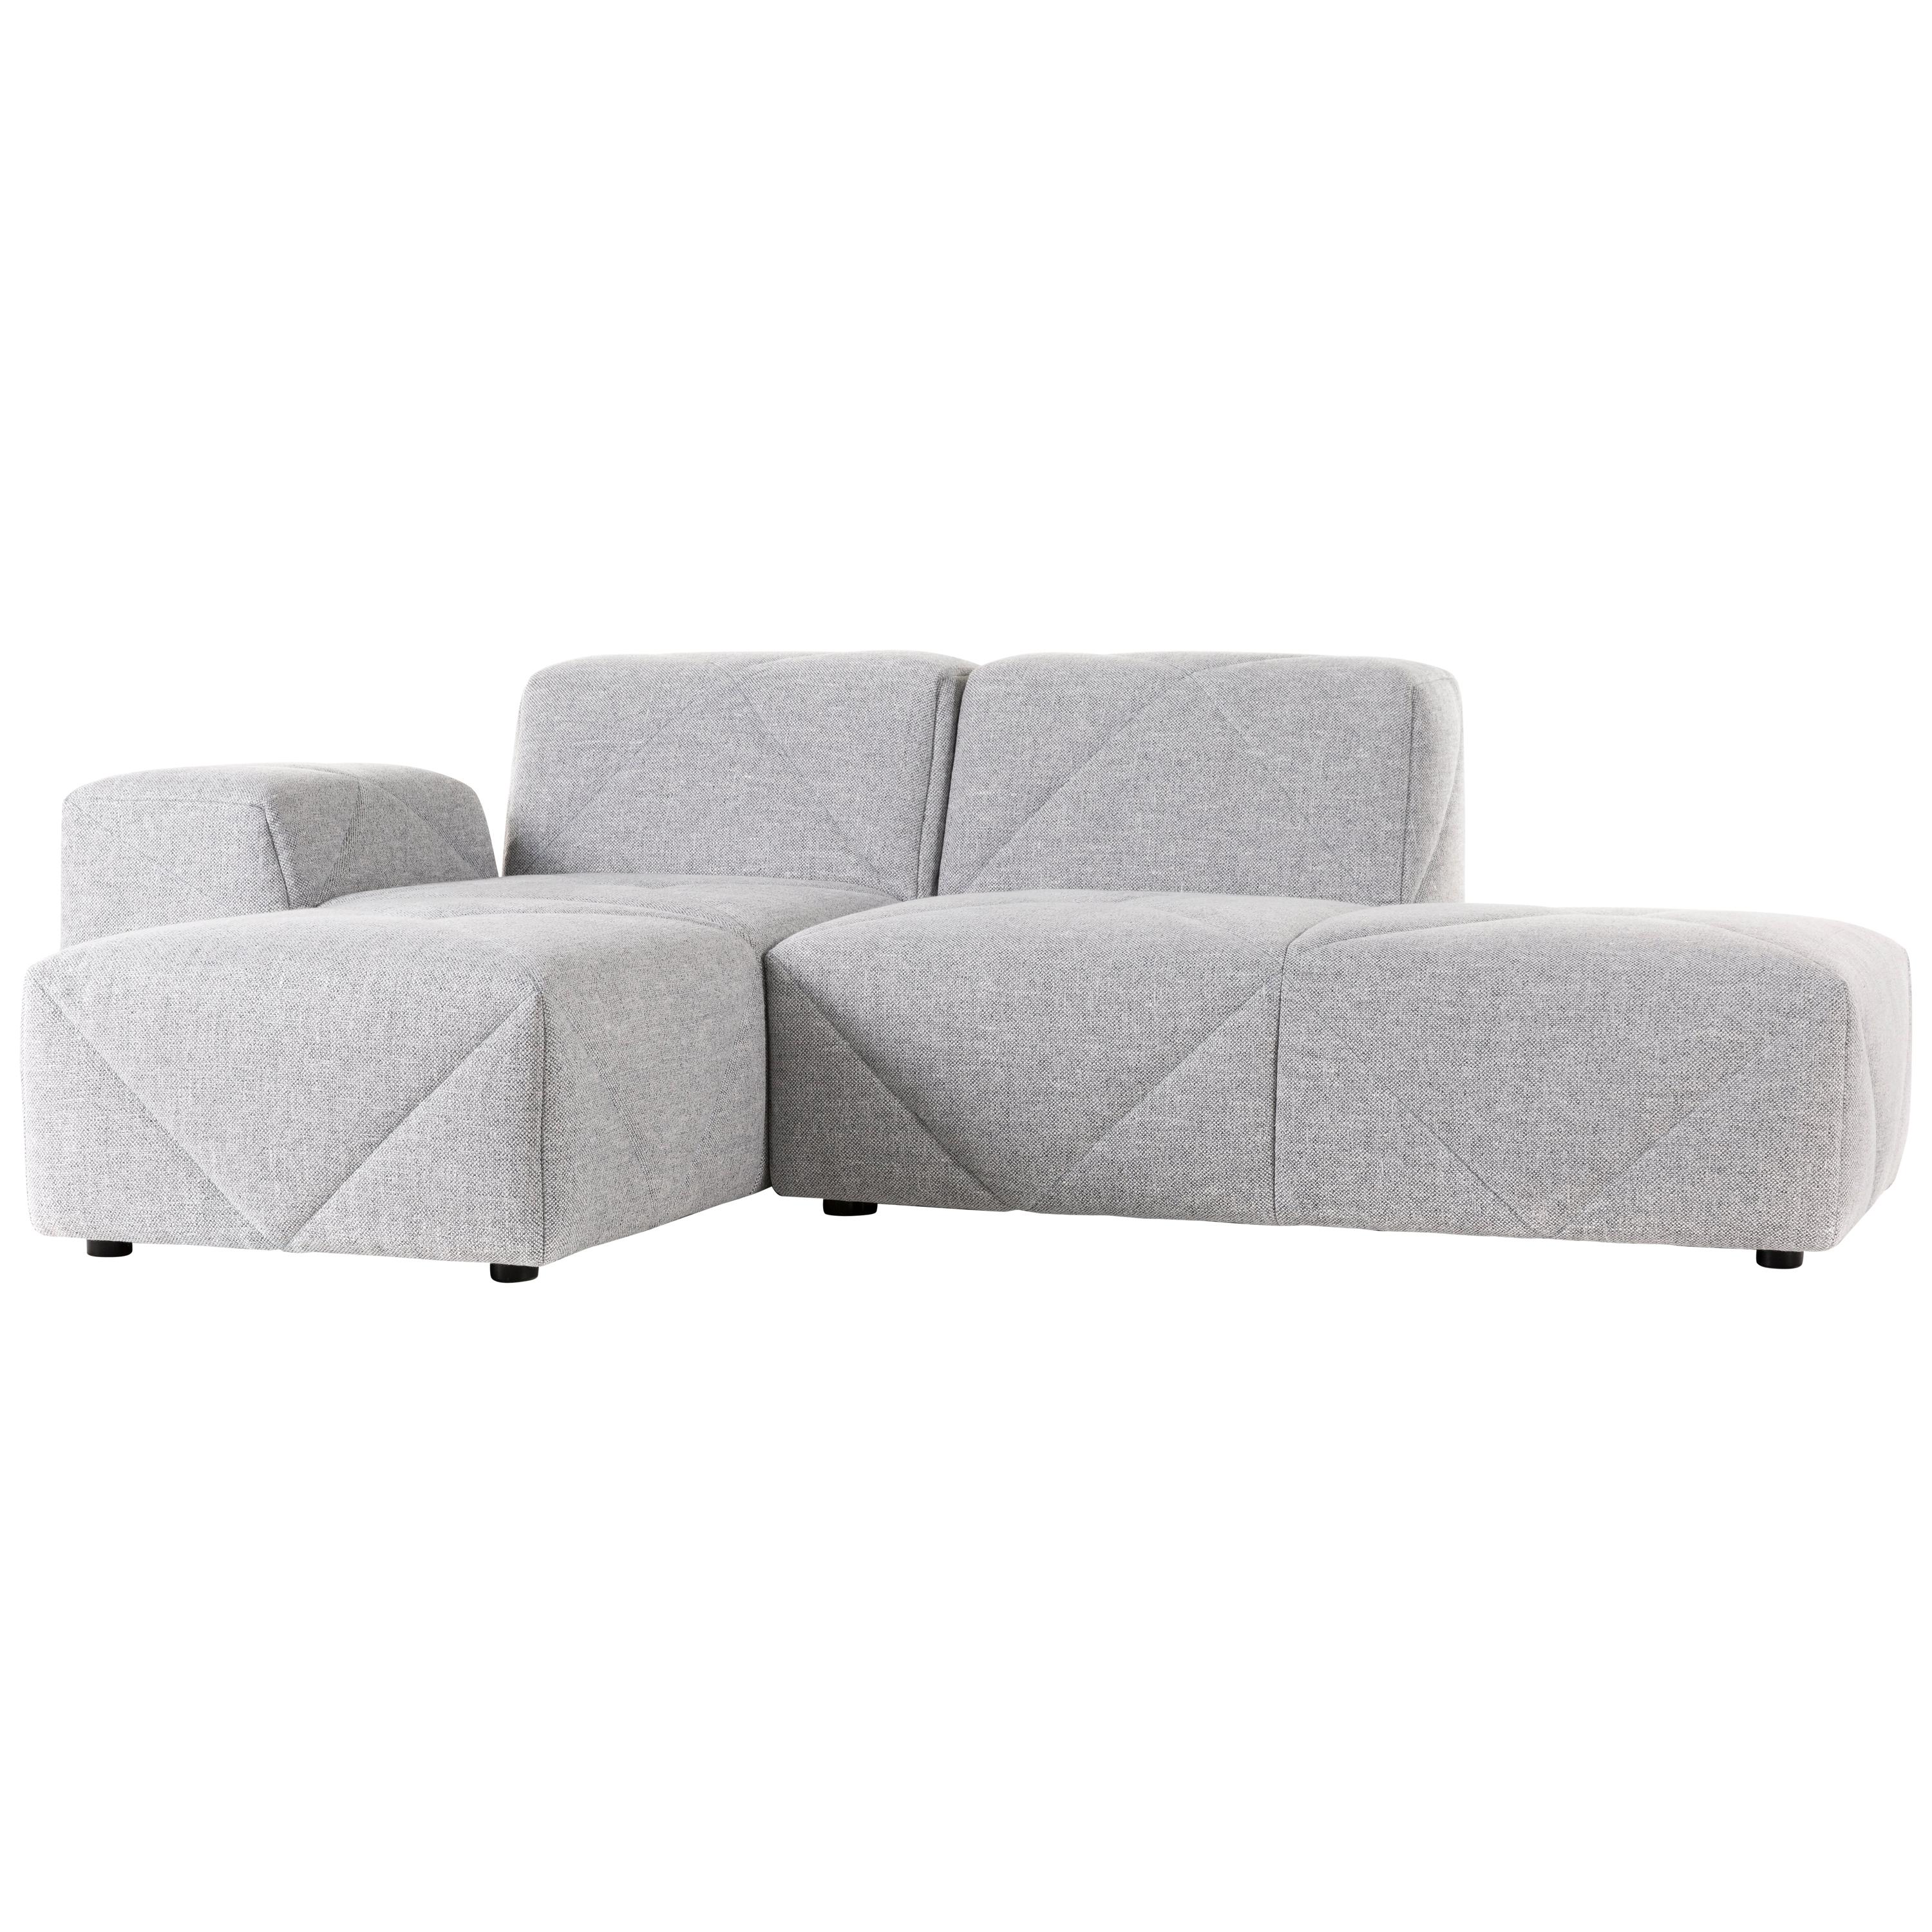 BFF Sofa 2 Piece Sectional Sofa by Marcel Wanders in Vesper Silver Fabric For Sale